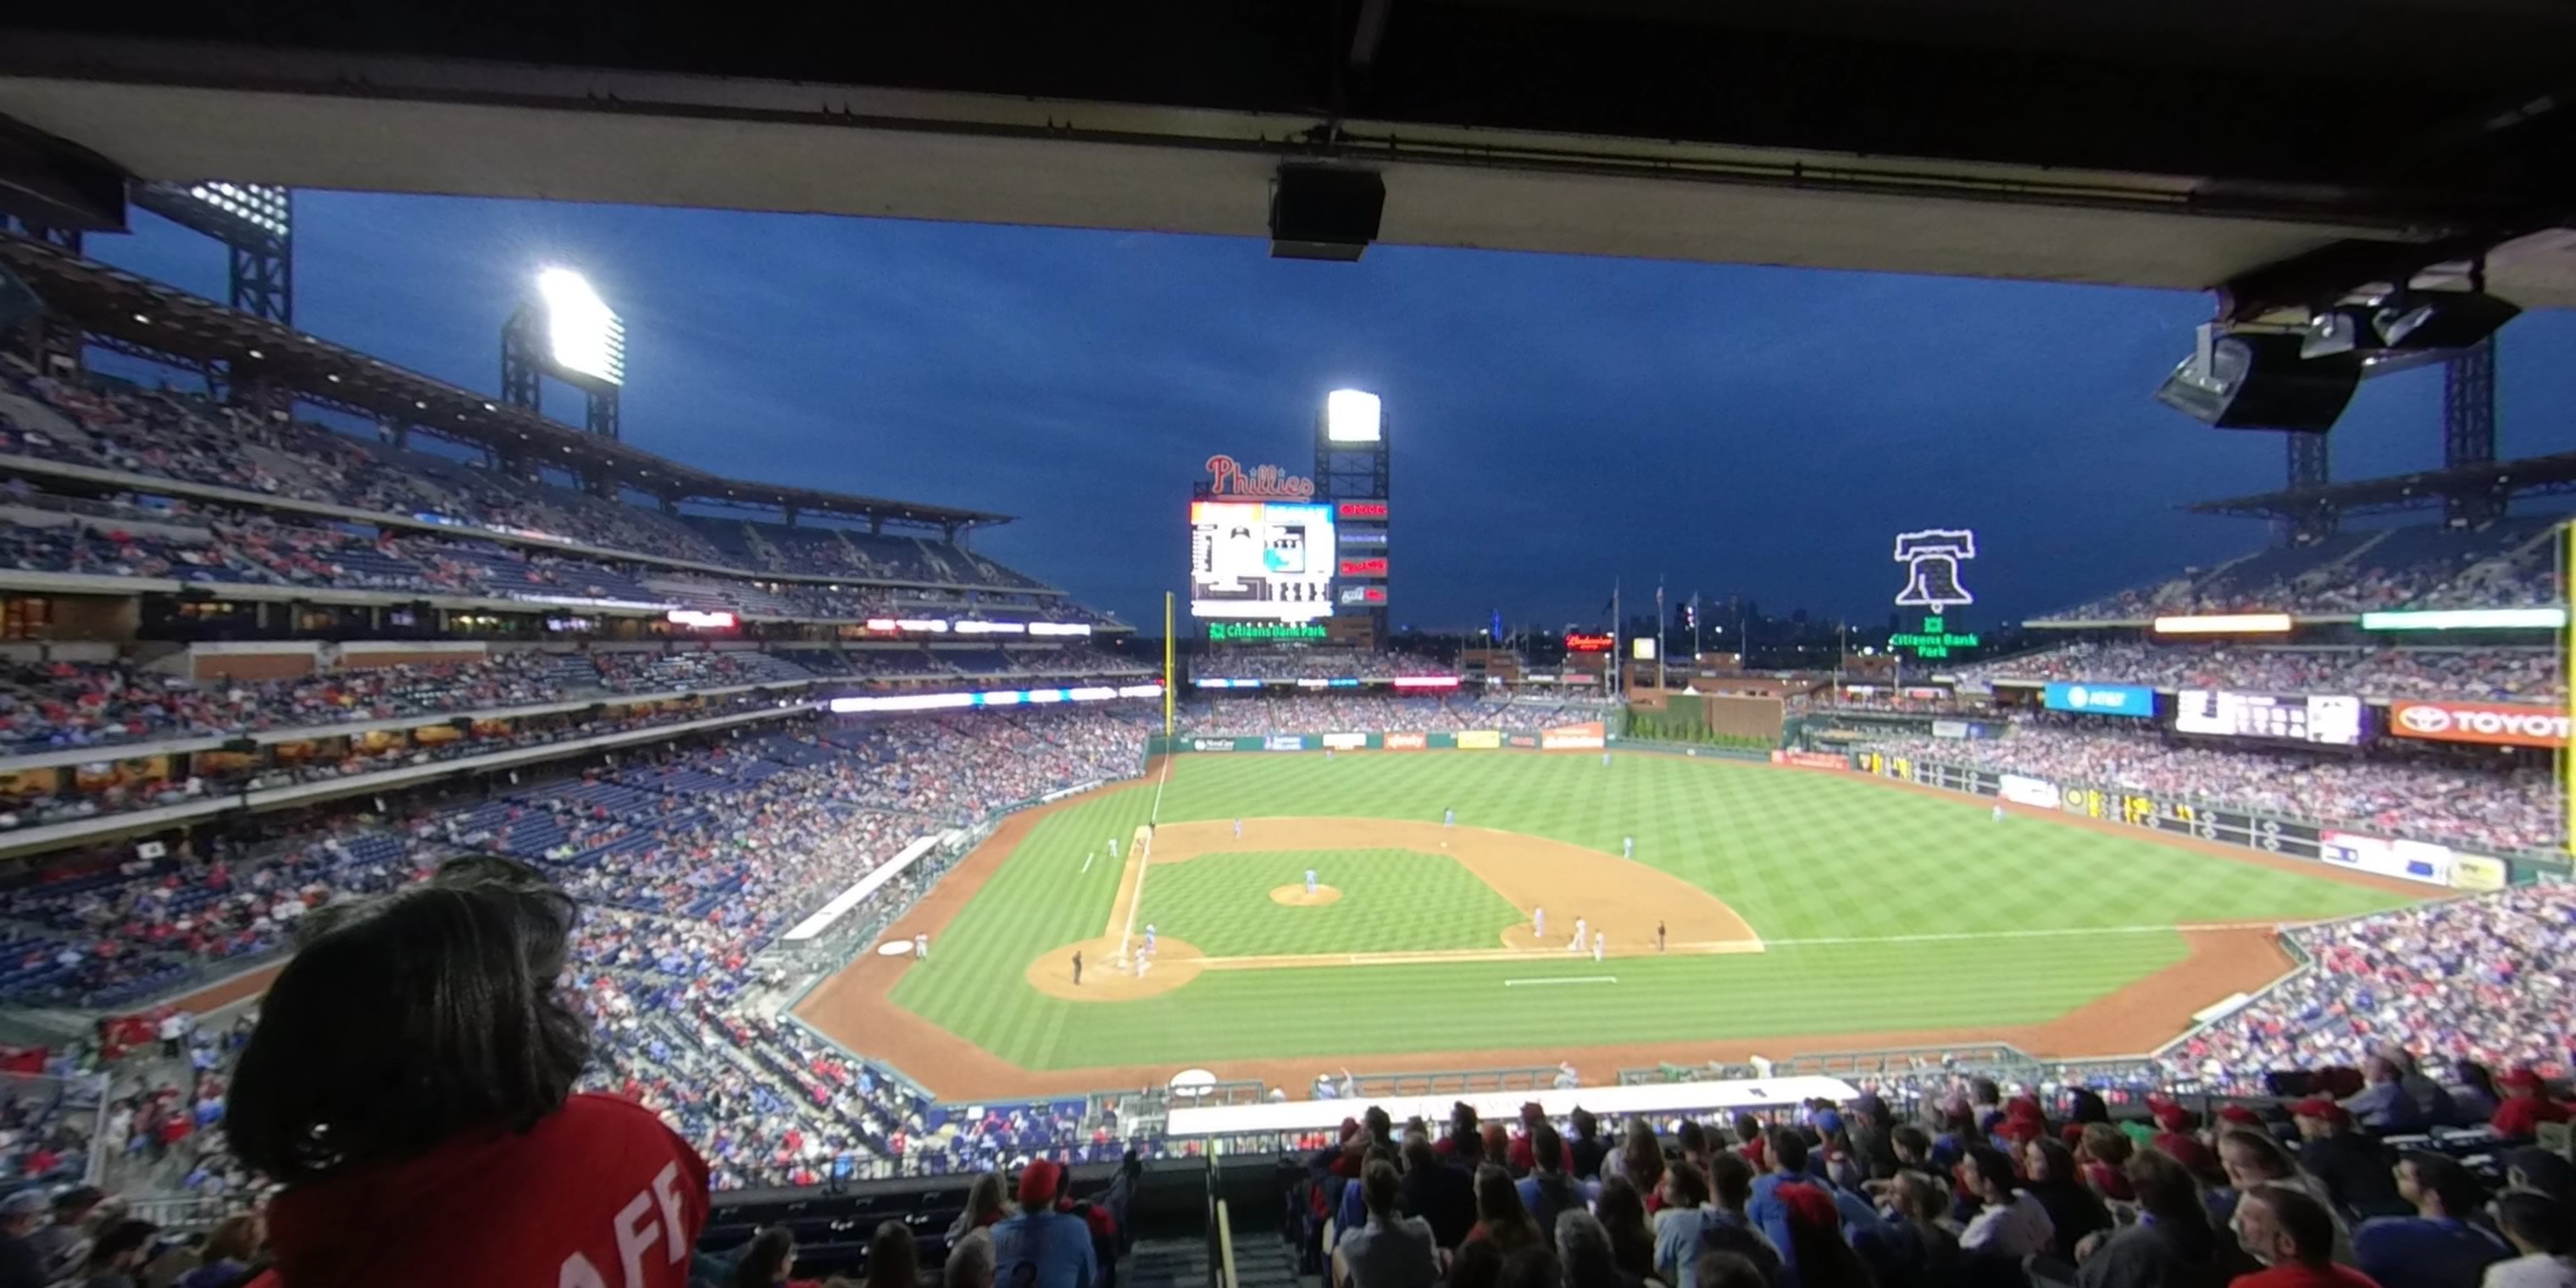 section 217 panoramic seat view  for baseball - citizens bank park